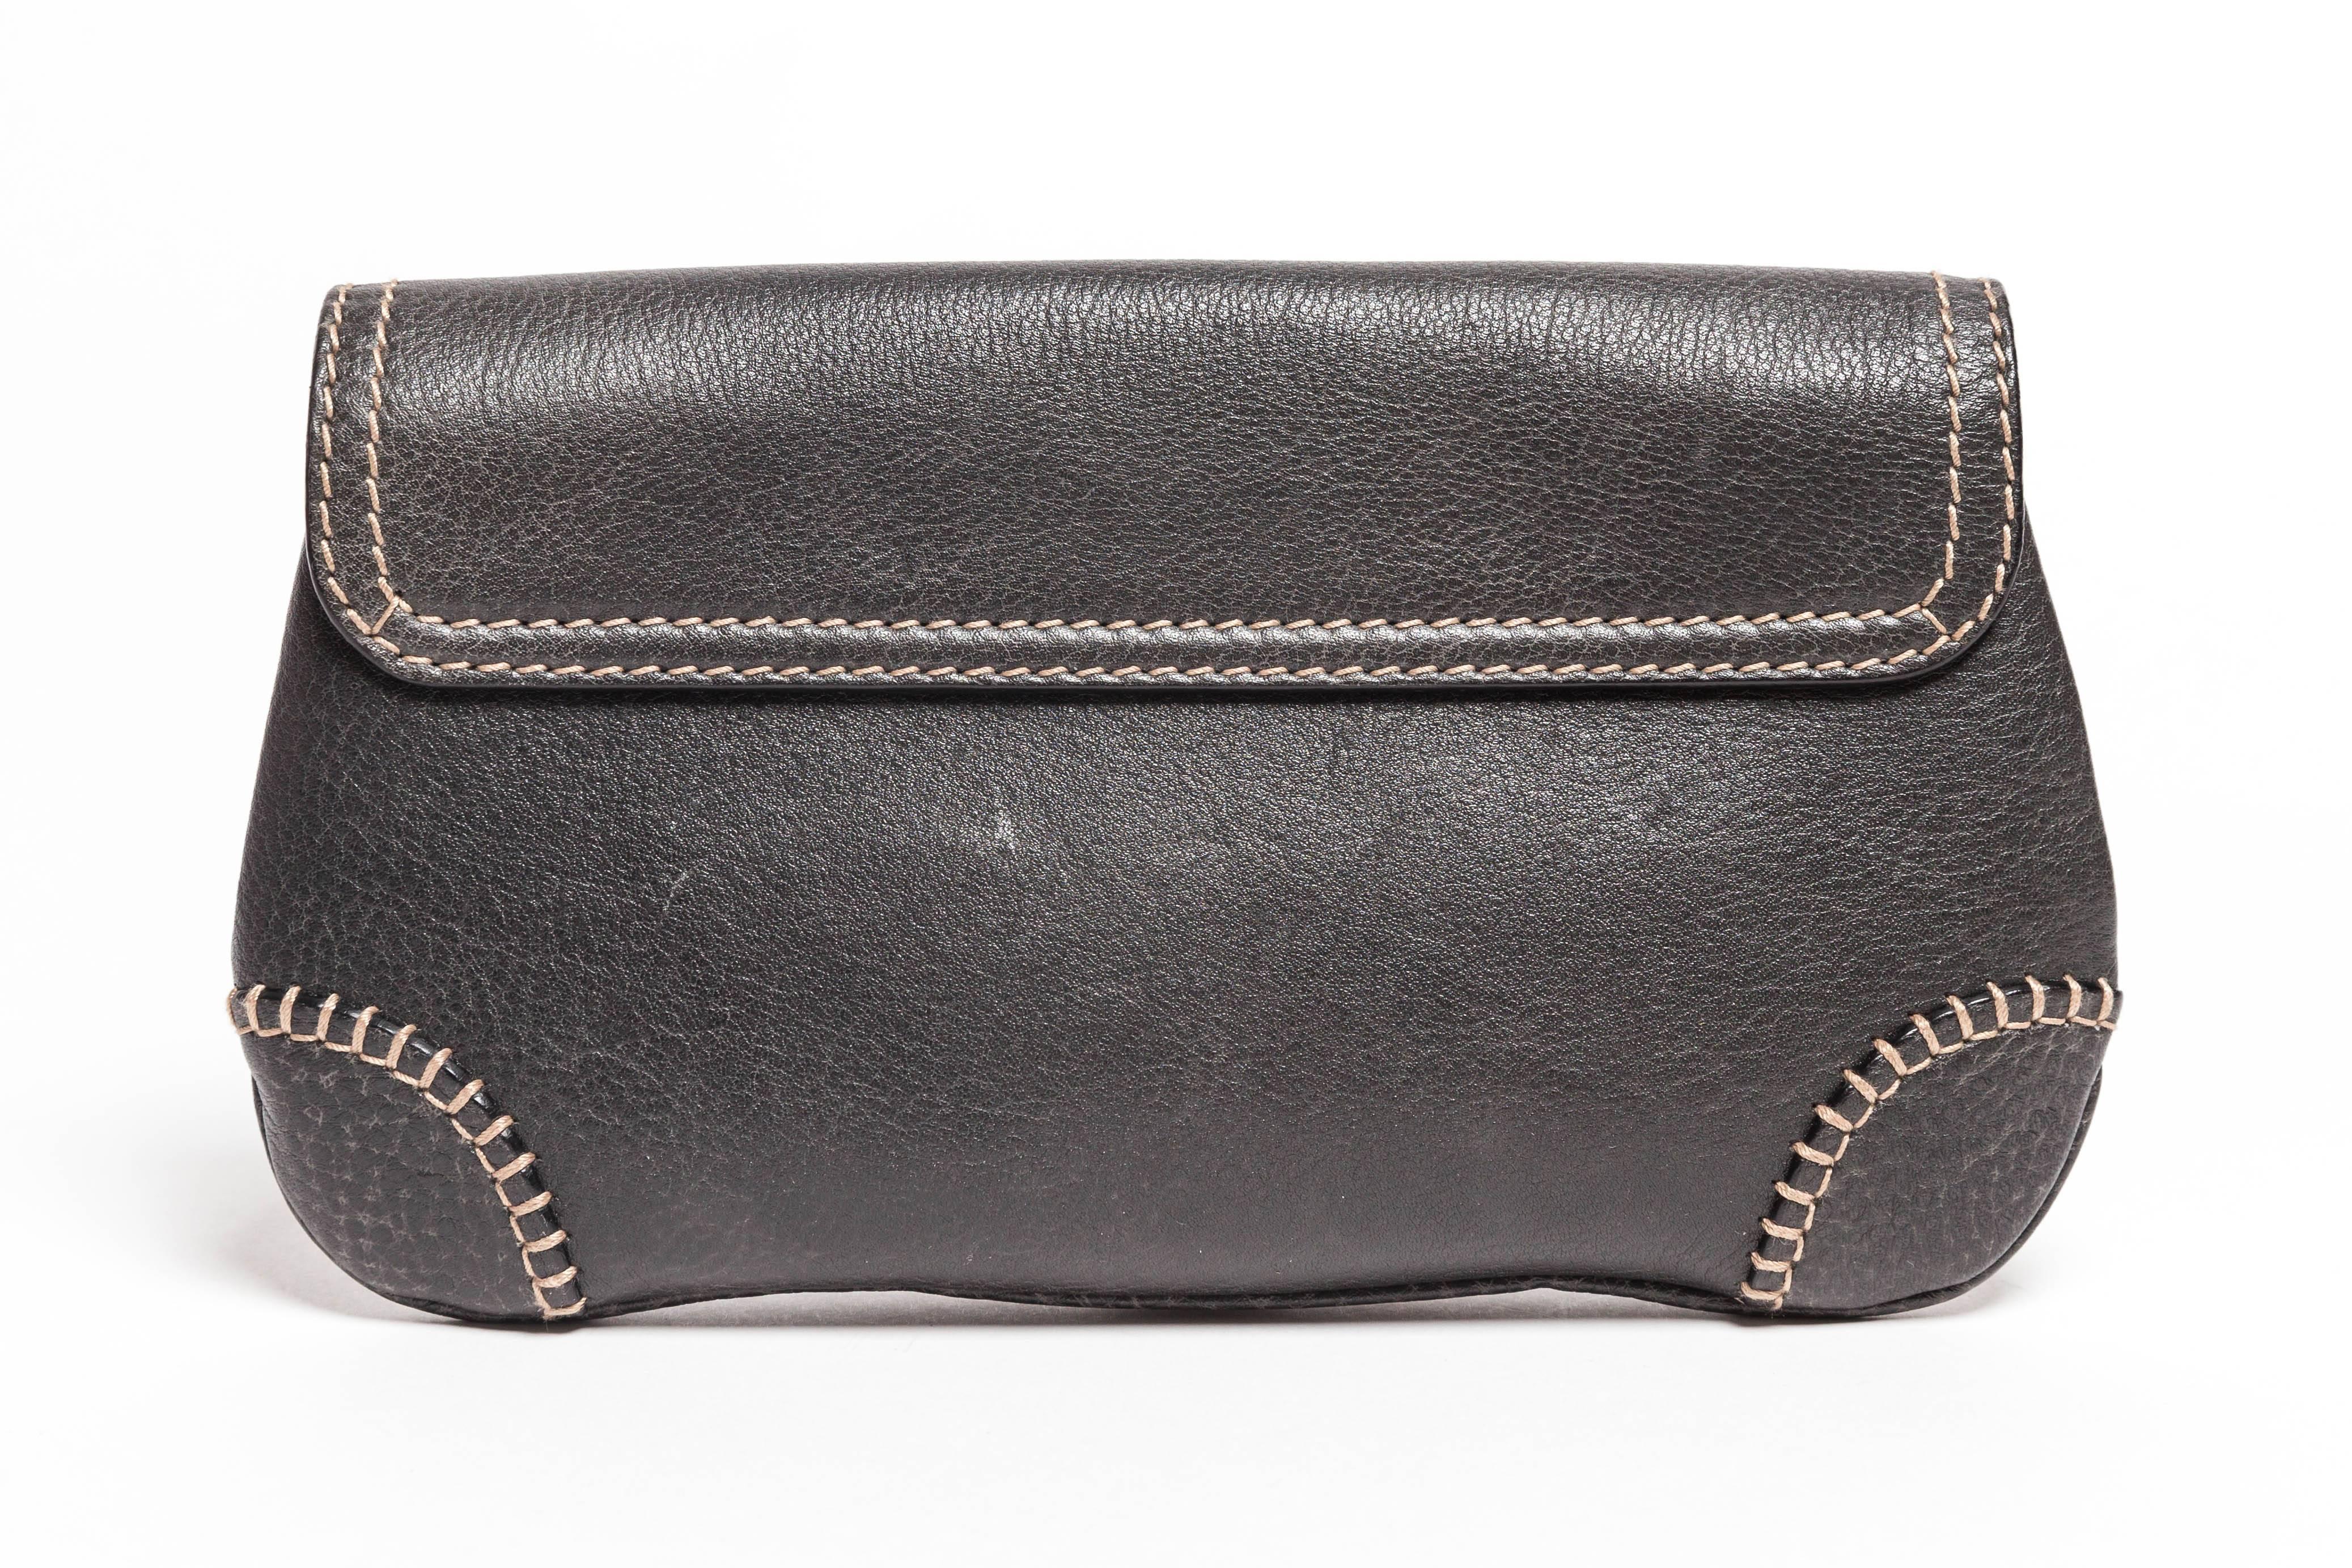  Pebbled Leather Gucci Clutch in Graphite Grey 5